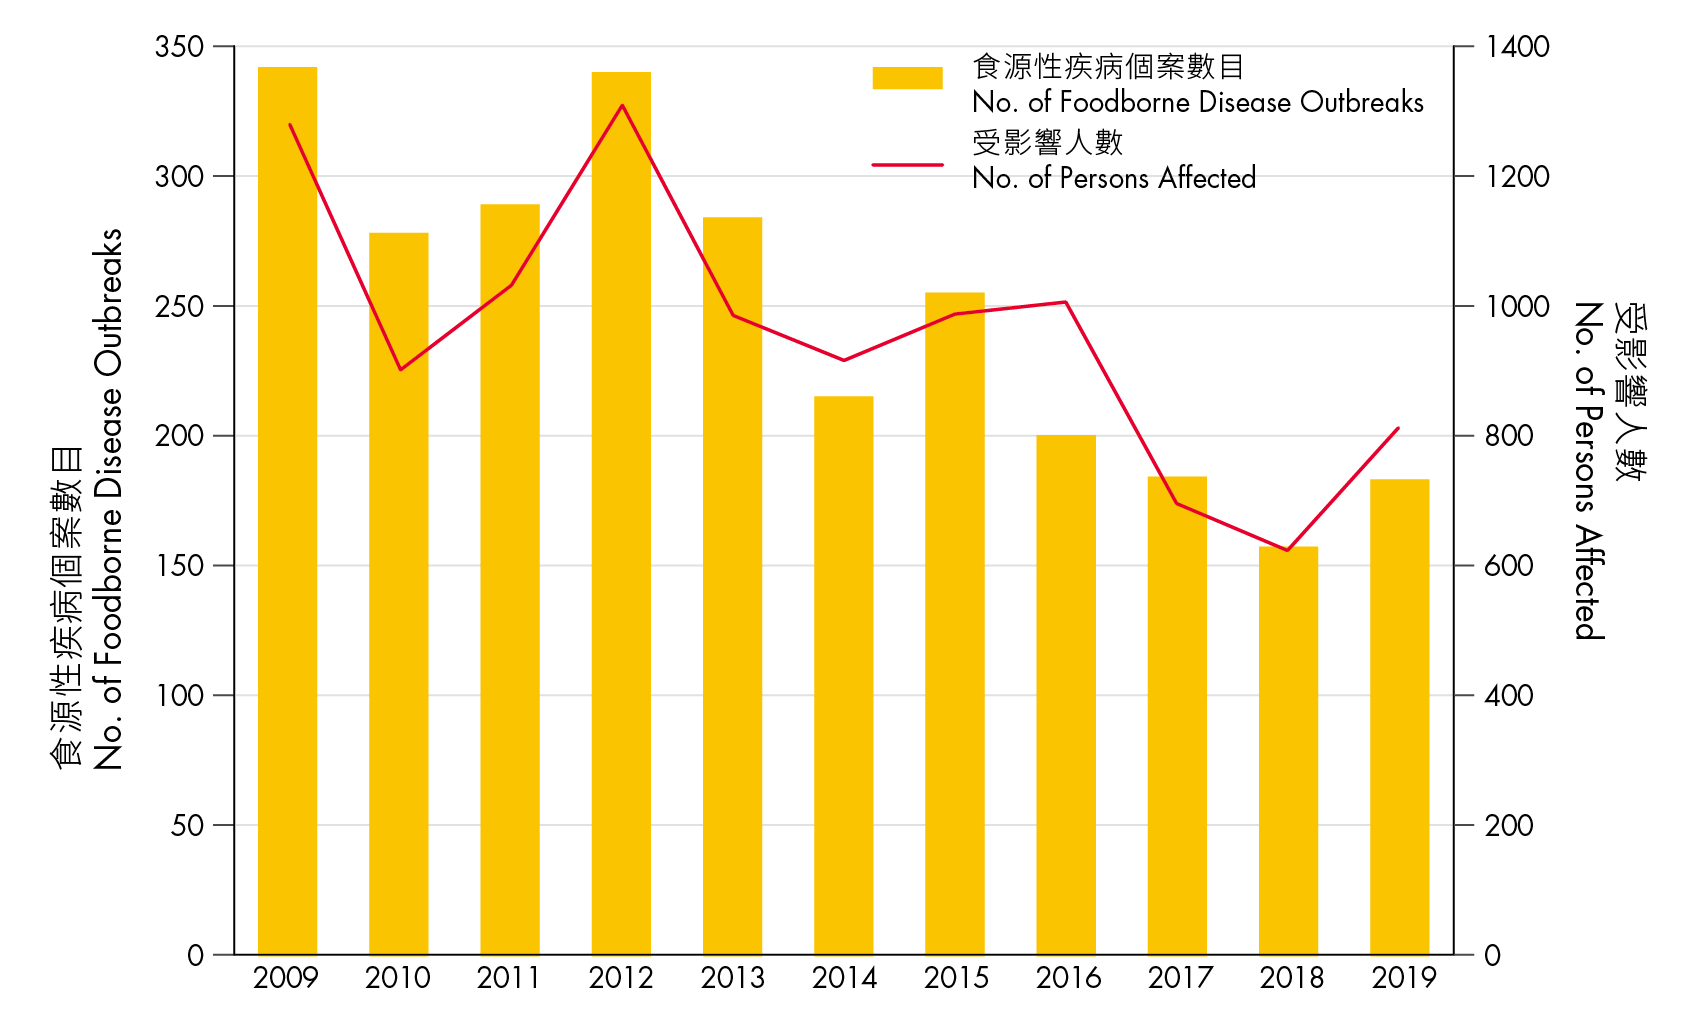 Number of food poisoning outbreaks related to food premises and food business and the corresponding number of persons affected from 2009 to 2019